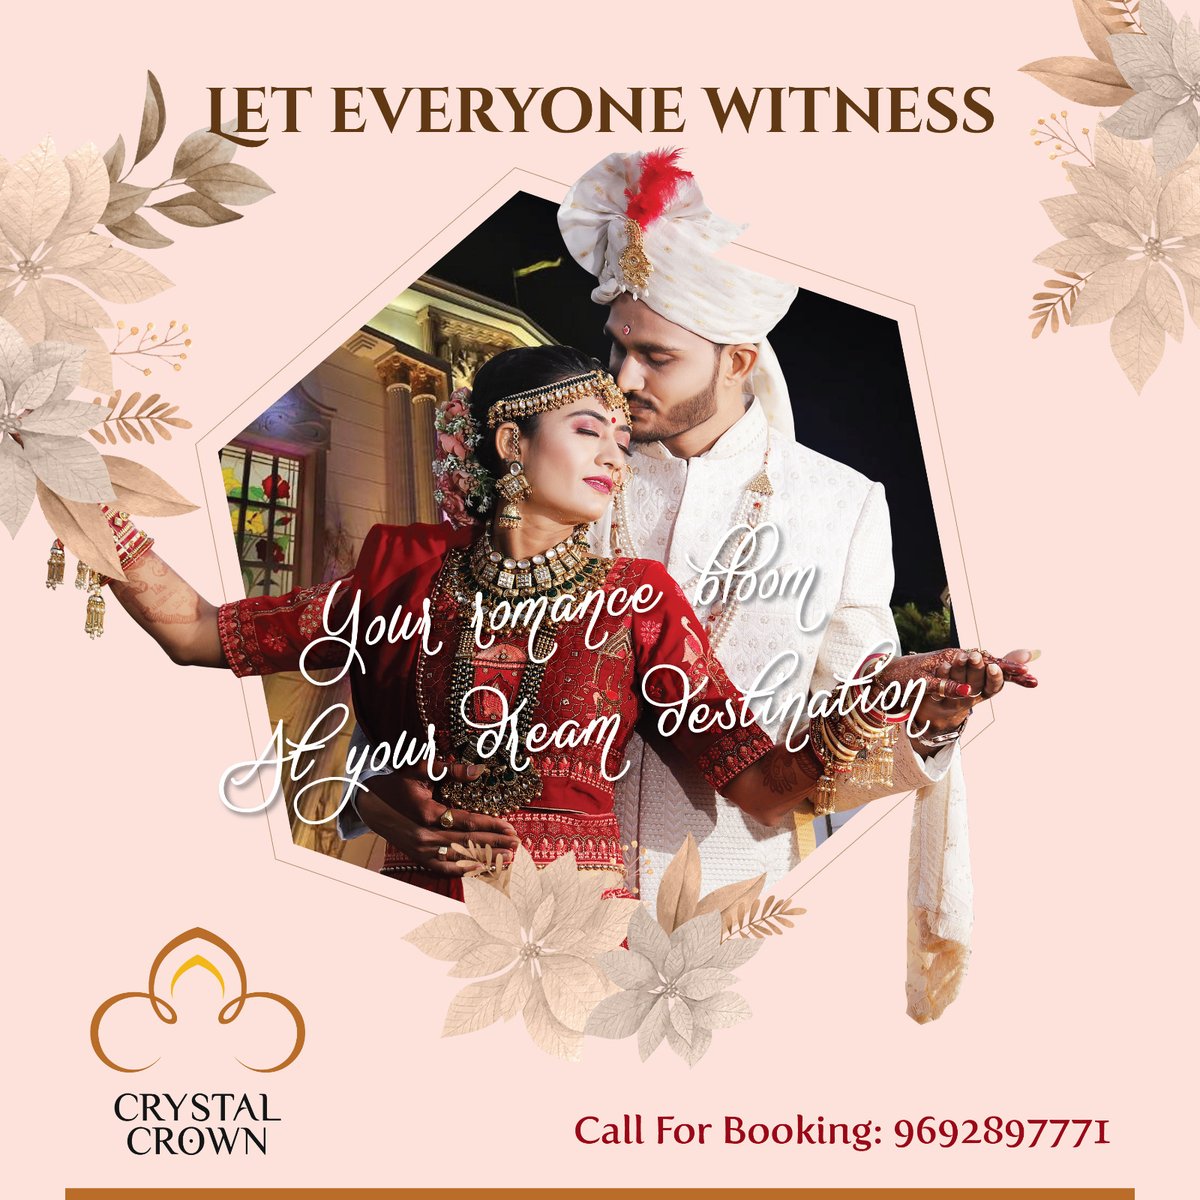 Lock in Your Wedding Date by Pre-booking Our Elegant Crystal Crown by Panda Resorts.✨

Call Now at☎️096928 97771

#SangeetCelebration #SangeetMagic #5StarExperience #HotelBliss #LuxuryHotel #LuxuryAccommodation #LuxuryGetaway #SuiteLife #LuxuryEscape  #PandaResorts #CrystalCrown